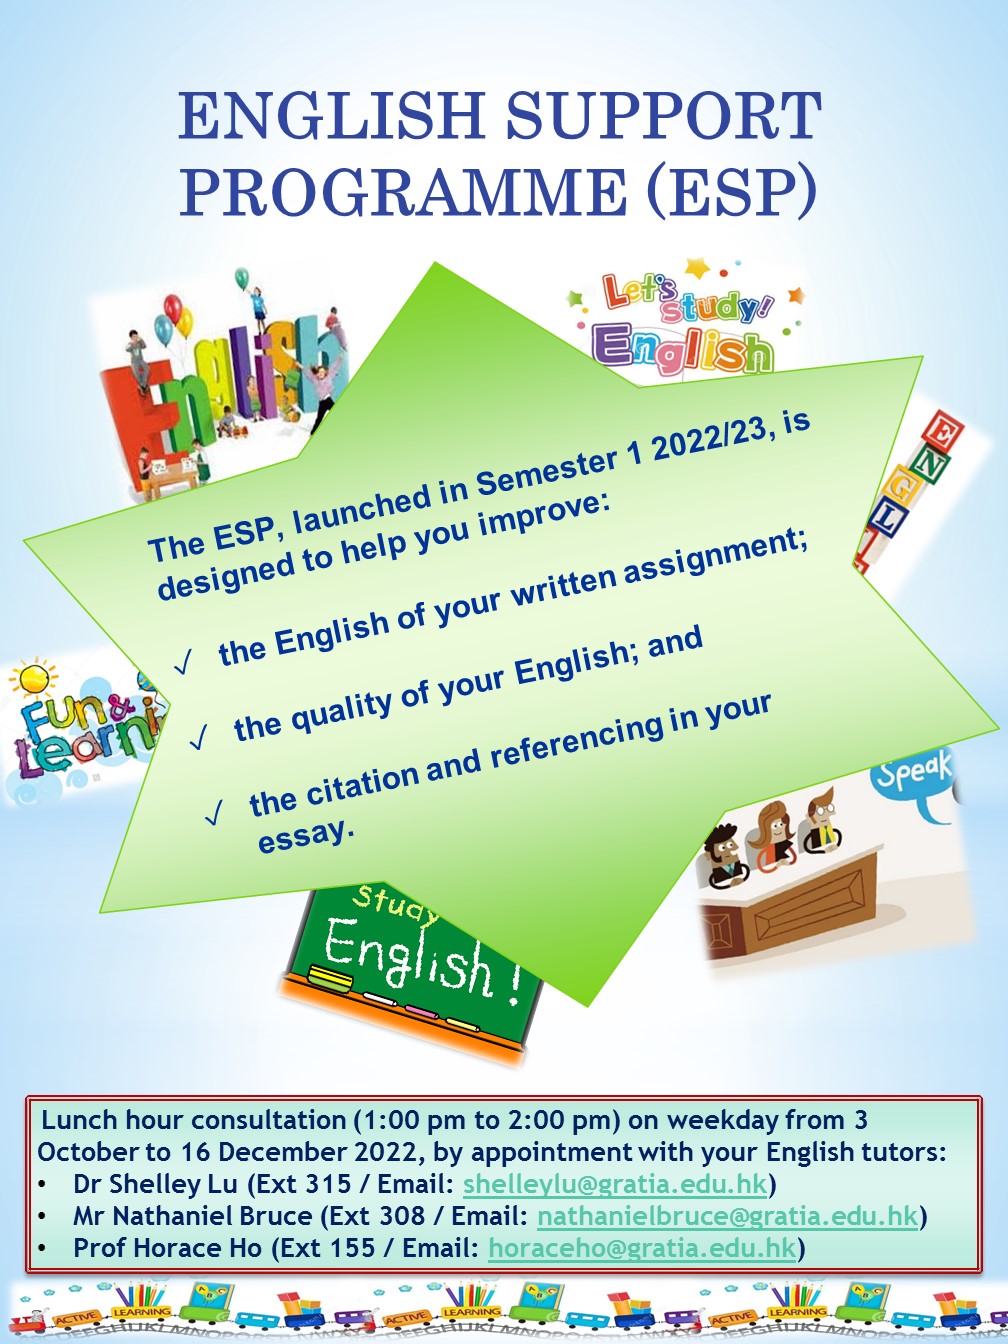 Lunch hour consultation with your English tutor via English Support Programme (ESP)   (3 October - 16 December 2022)